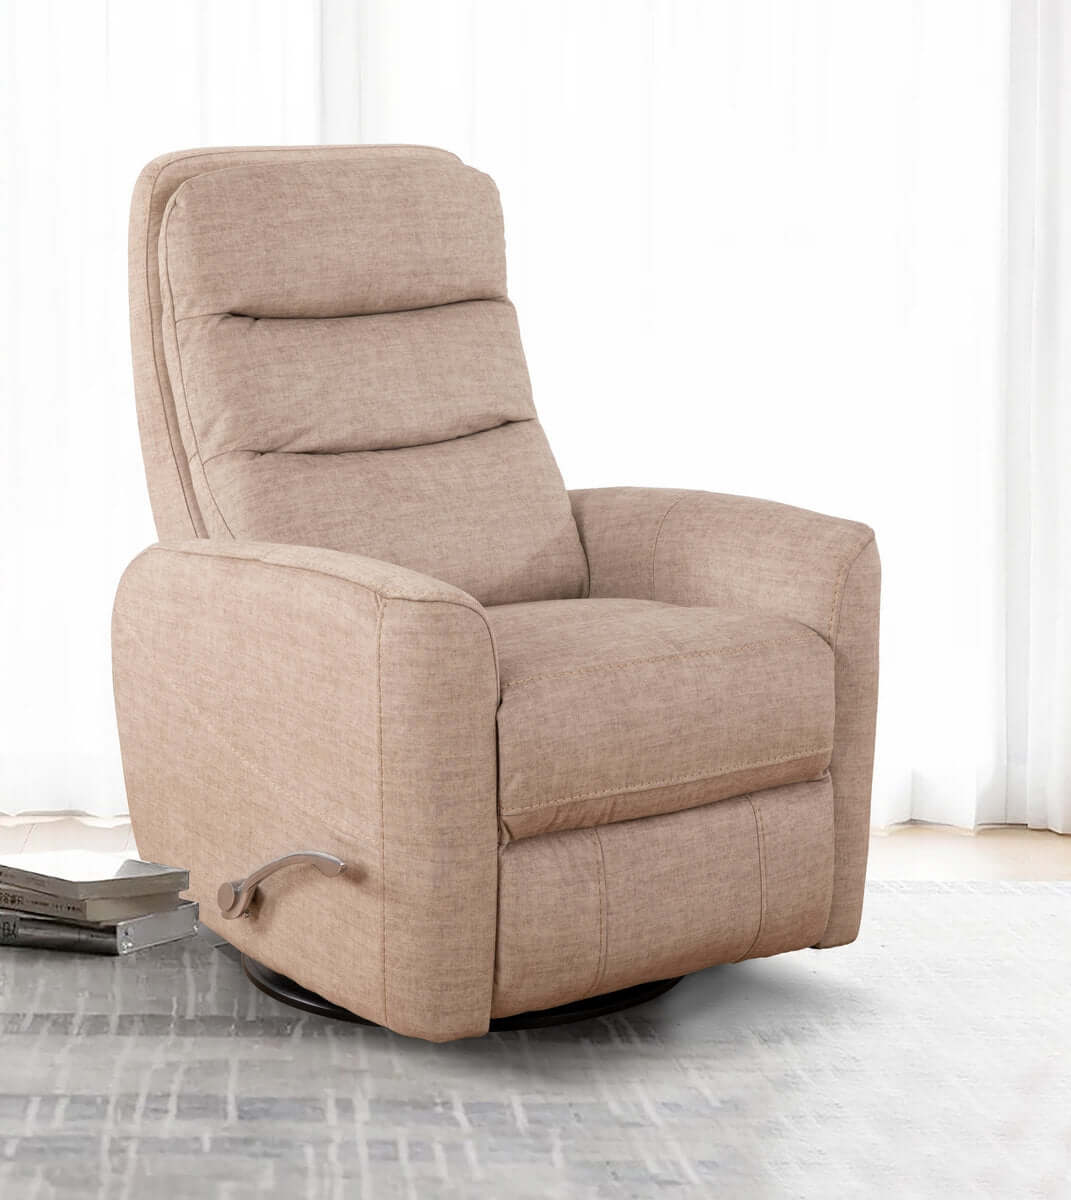 International Furniture Distribution Centre - Pearl Fabric Manual Recliner Chair with Solid Hardwood Frame - IF 6321